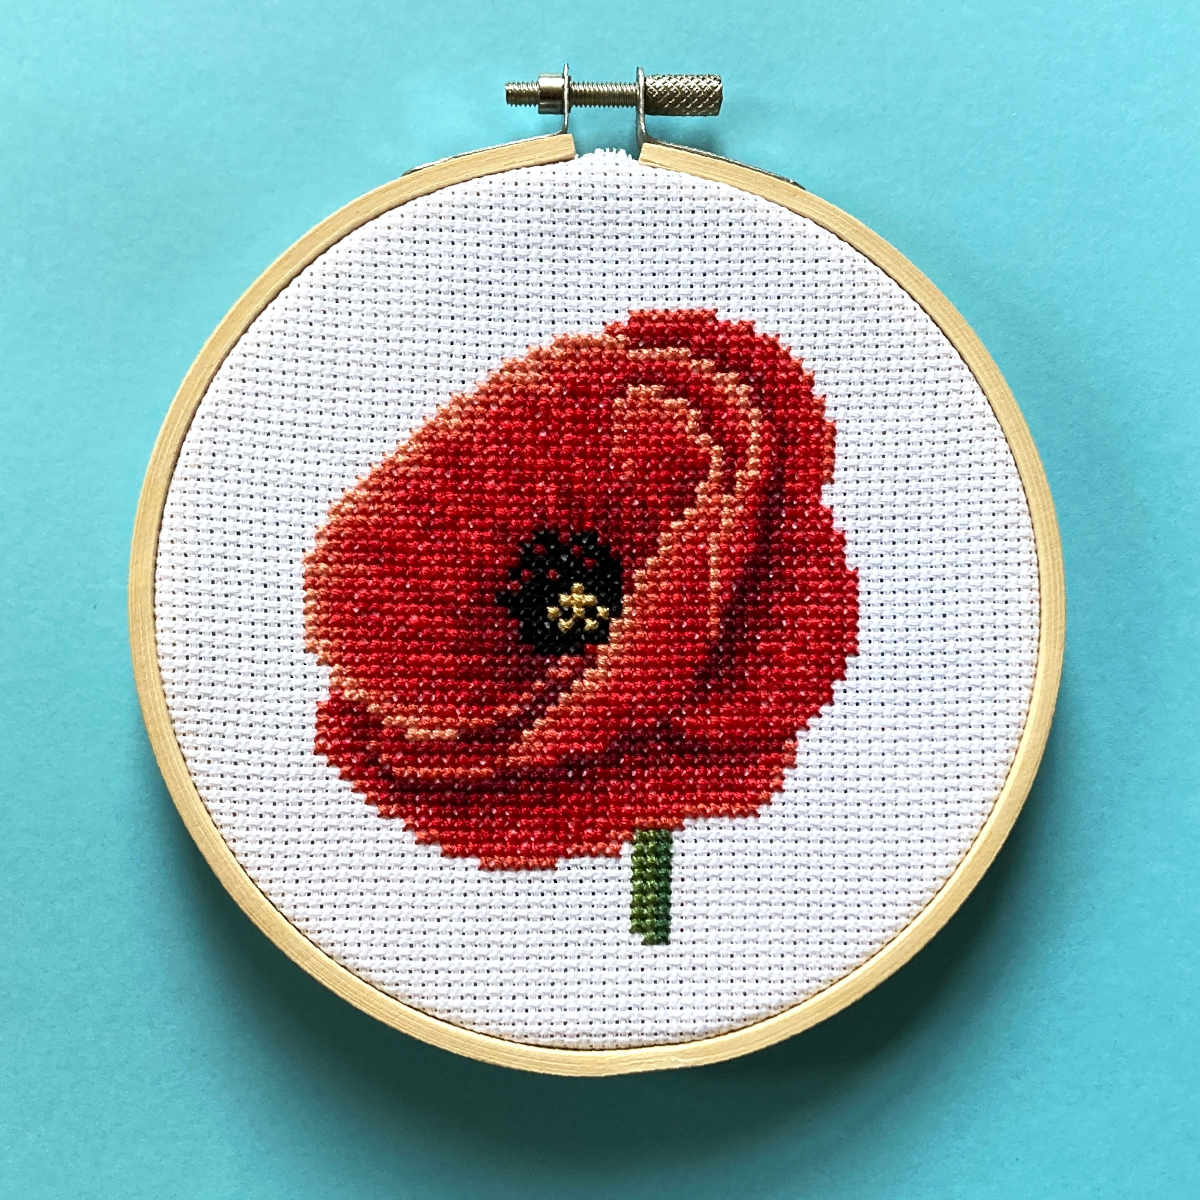 Red poppy cross stitch in a 5 inch embroidery hoop